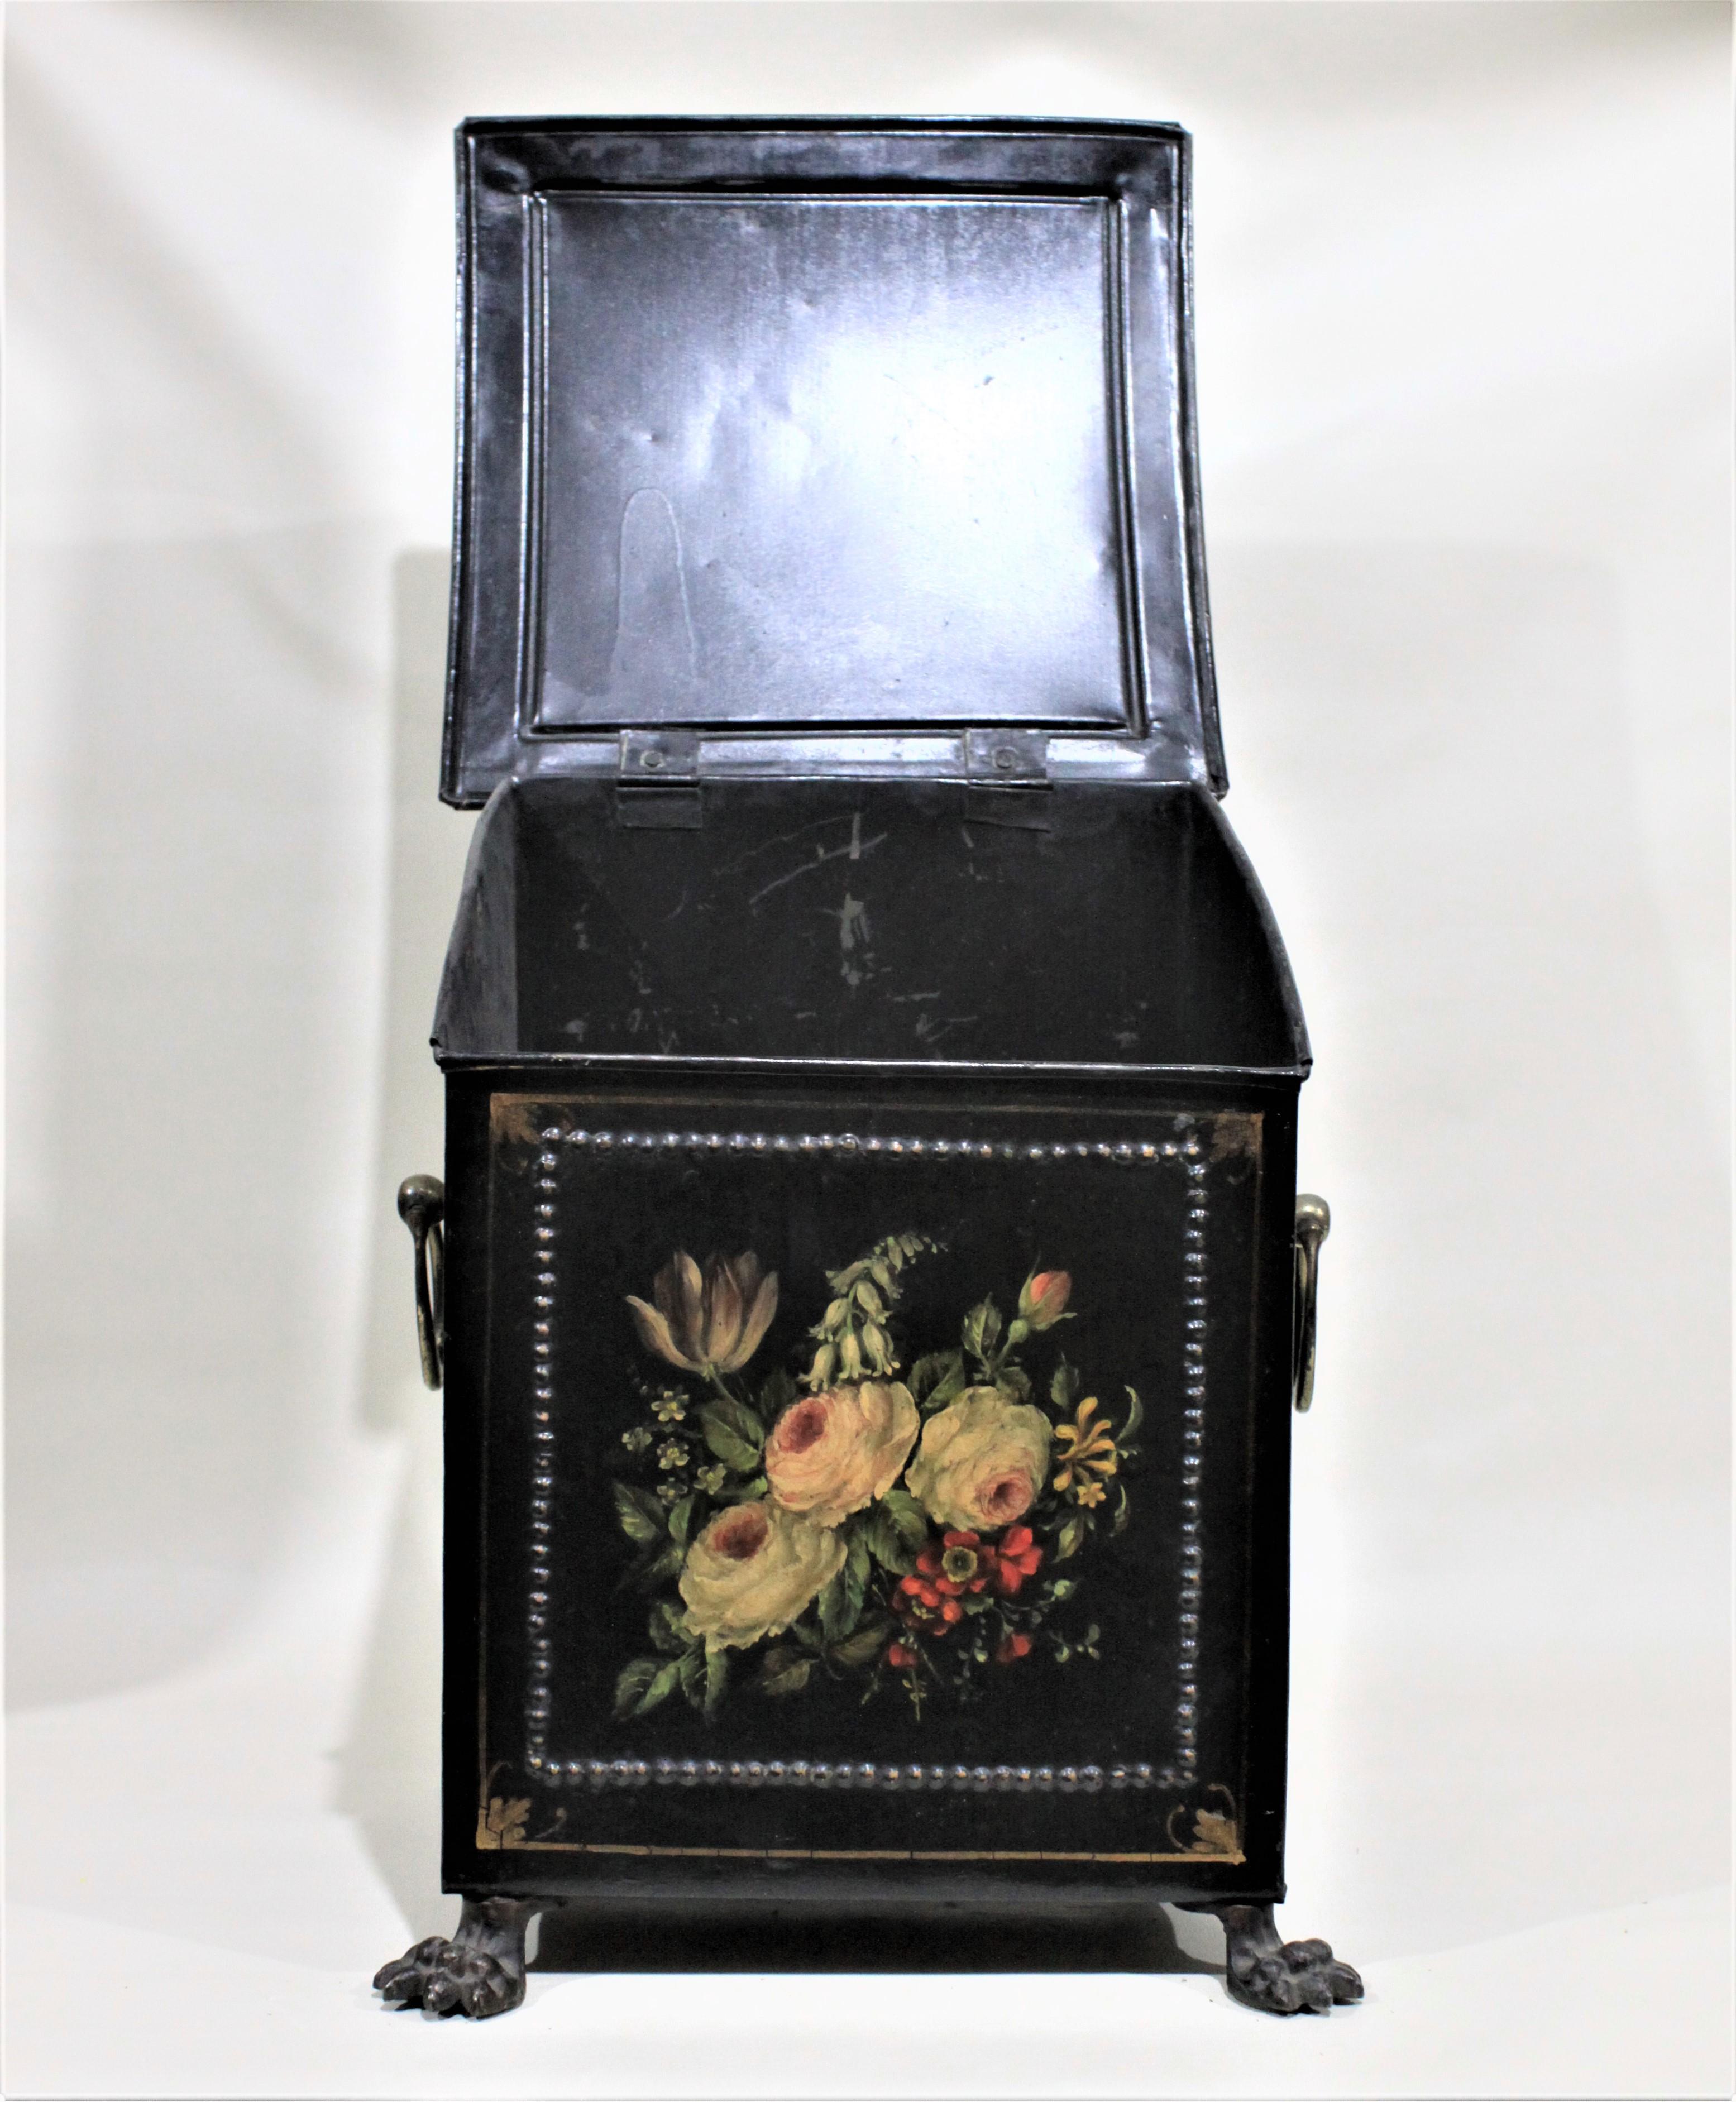 Metal Antique English Regency Toleware Footed Coal Box or Scuttle with Brass Handles For Sale